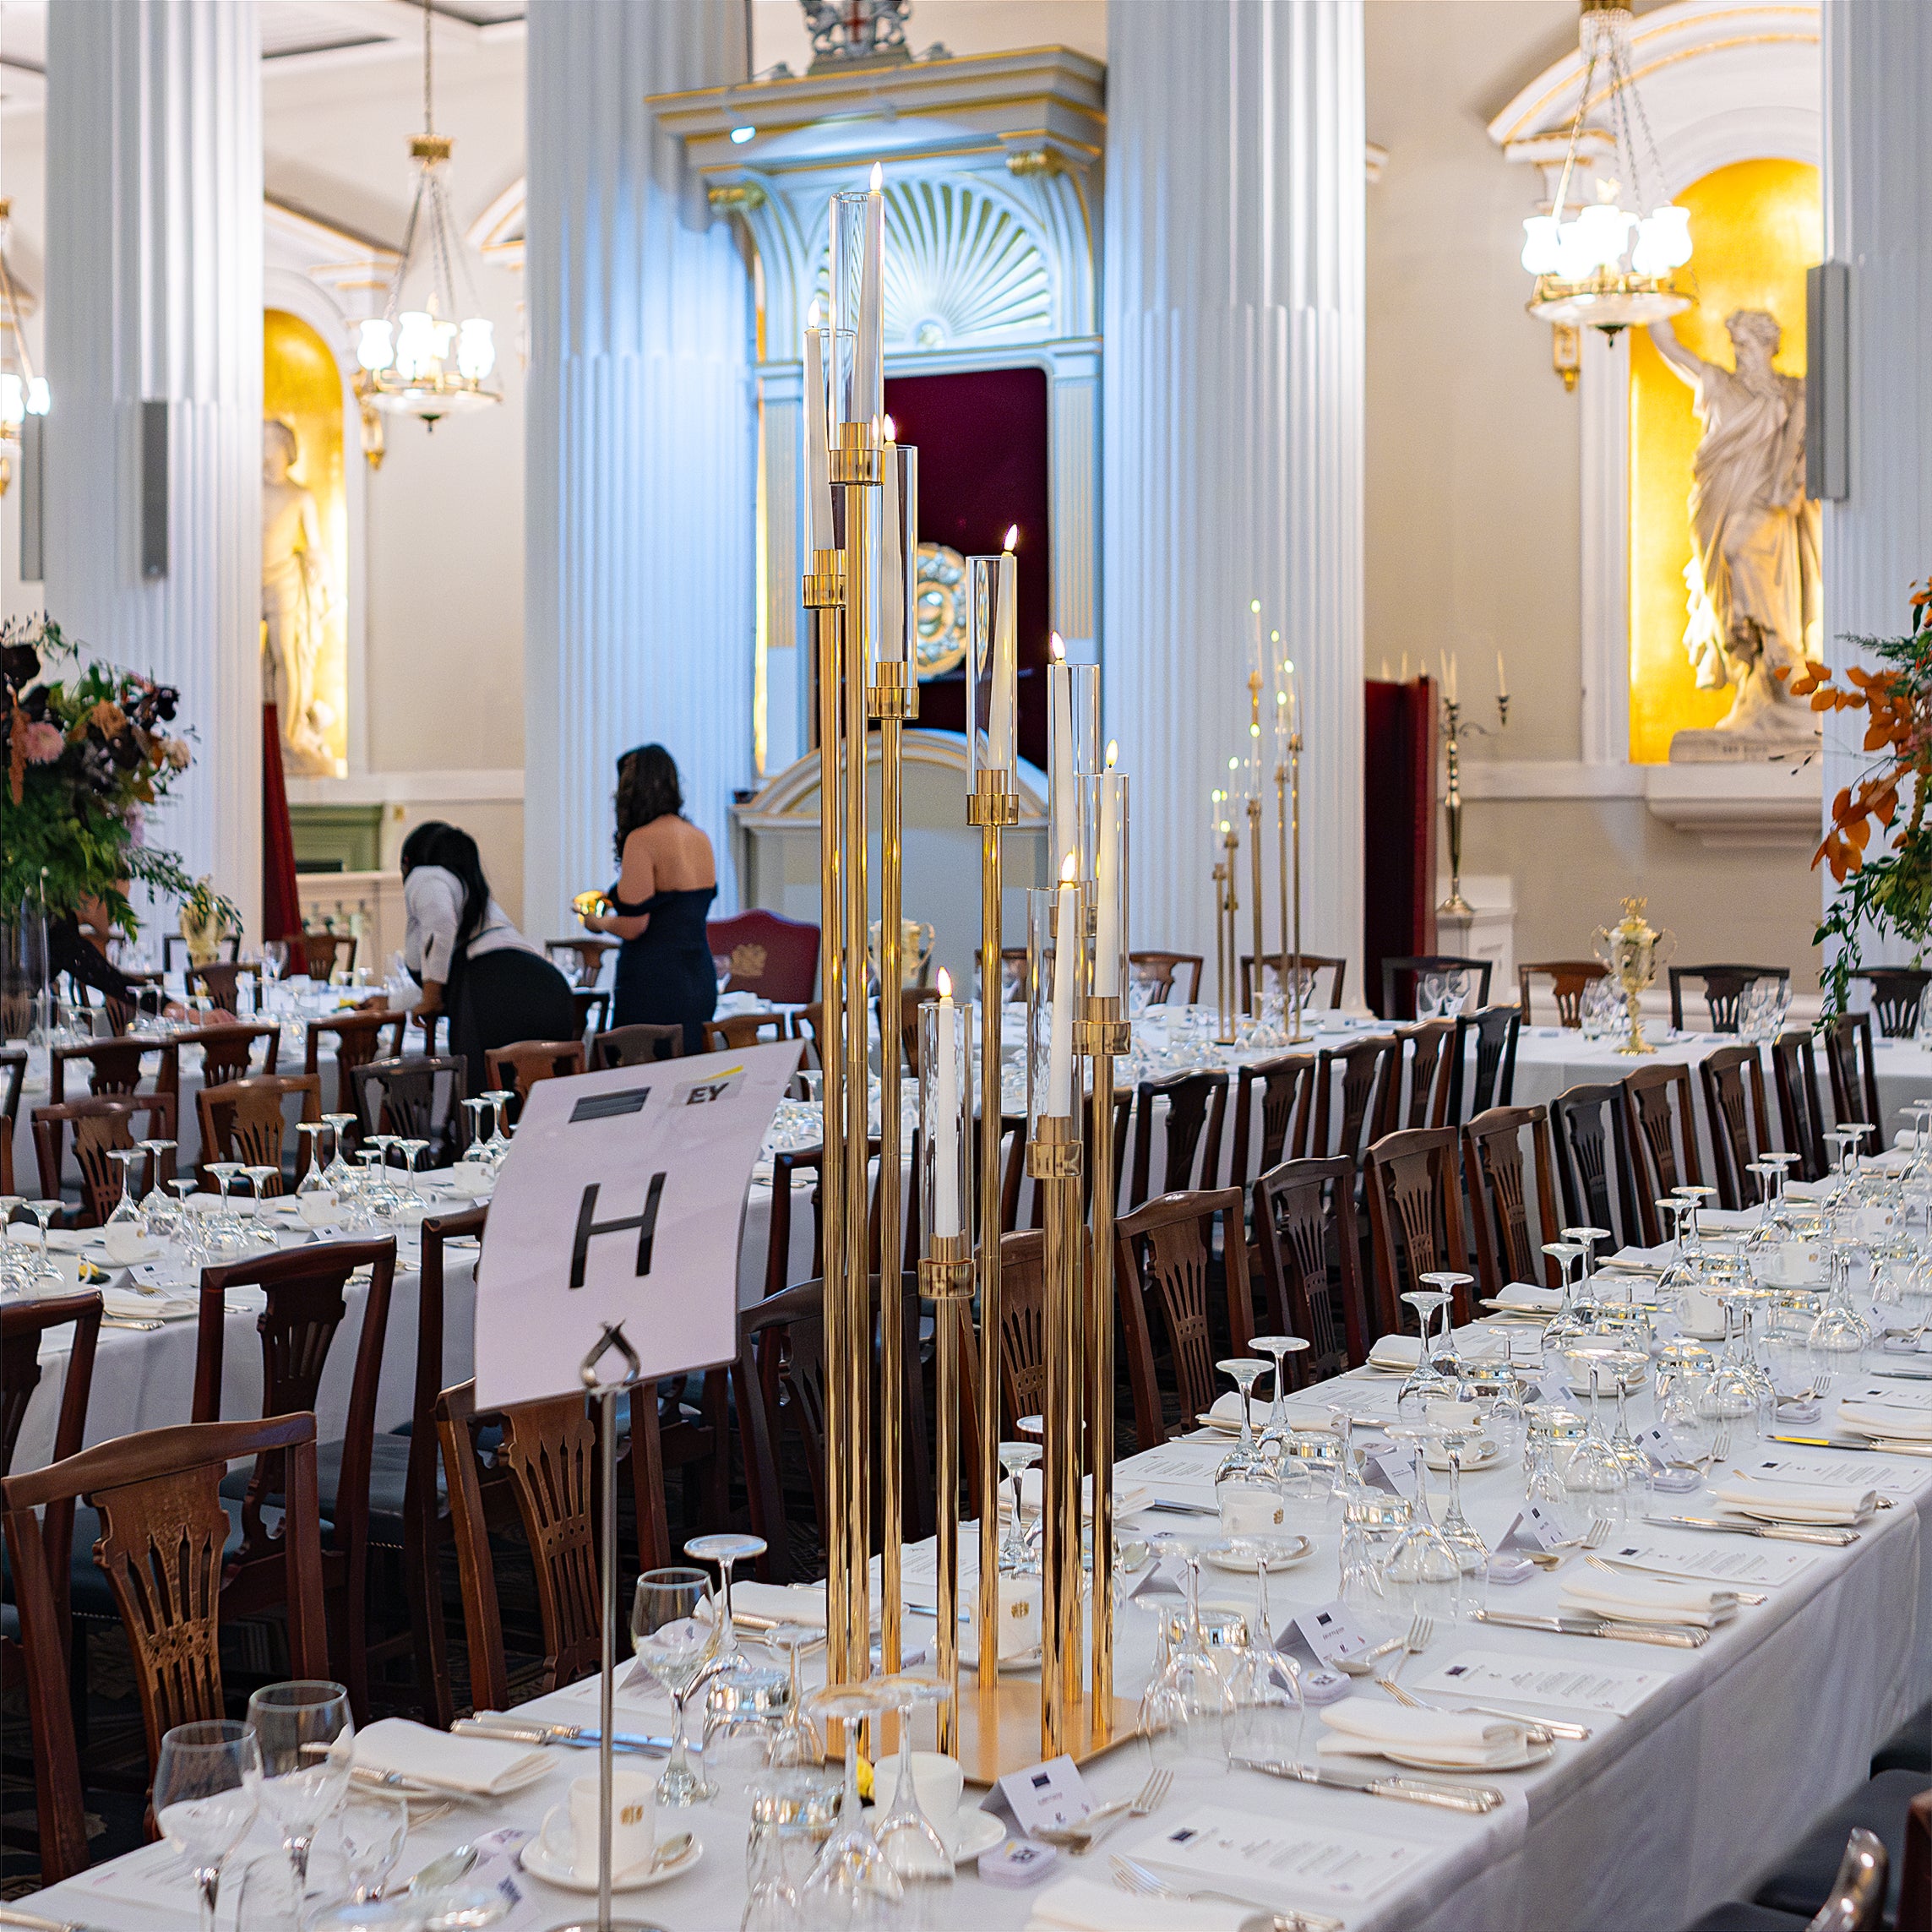 Decorative candelabras used to enhances the table design with elegance